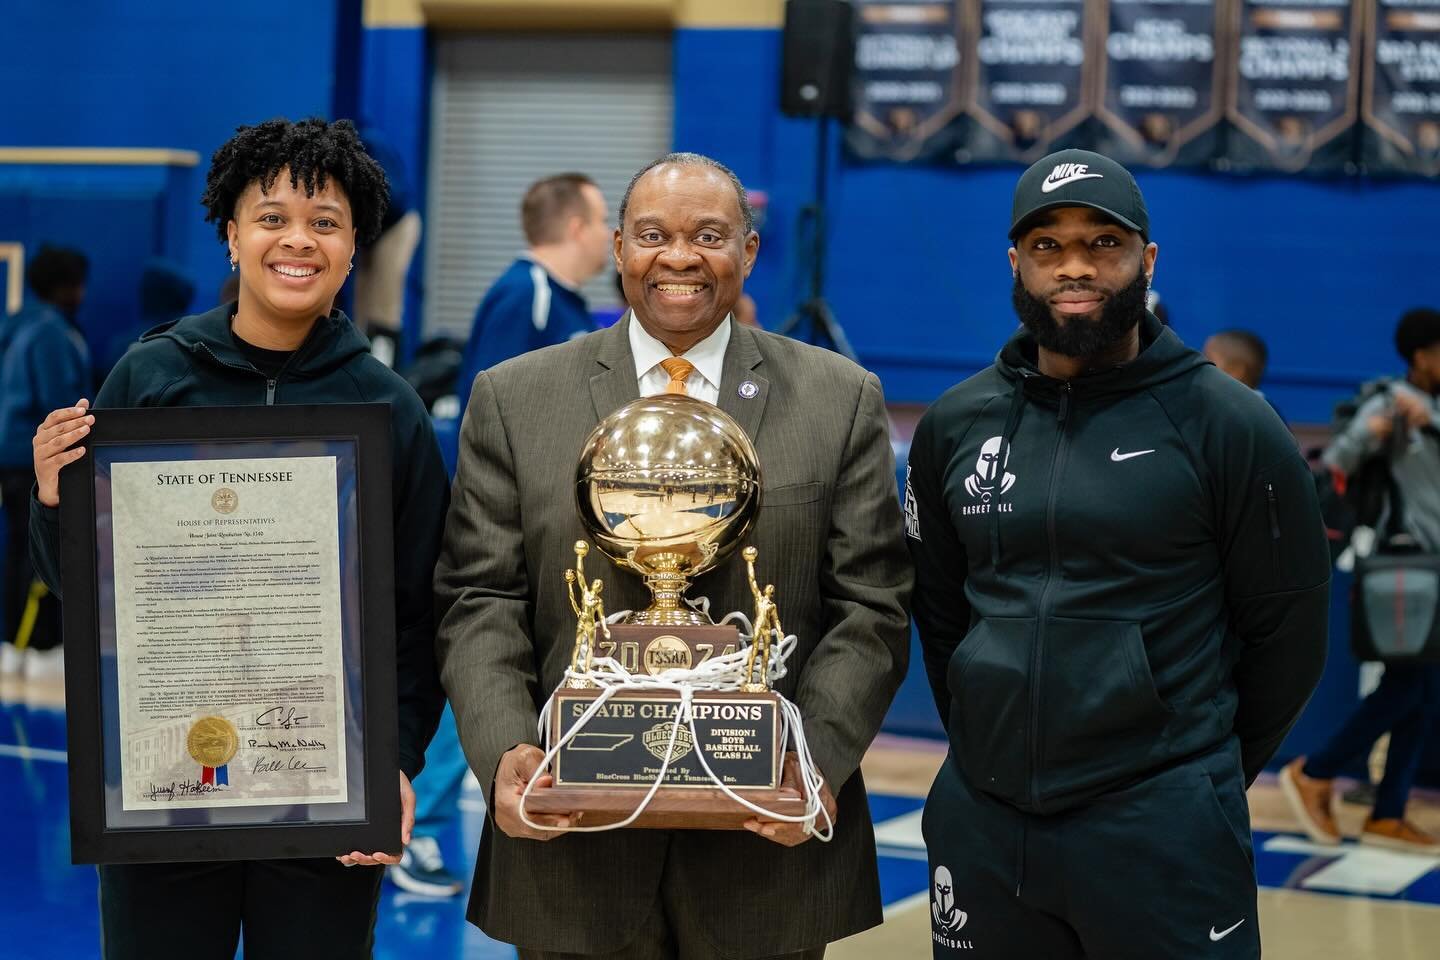 Ended the week with a visit from Representative Hakeem as he delivered a proclamation from the state of Tennessee celebrating our state championship!
&bull;&bull;&bull;&bull;&bull;
#chattprep #sentinels #statechampions #basketball #chattanooga #tenne